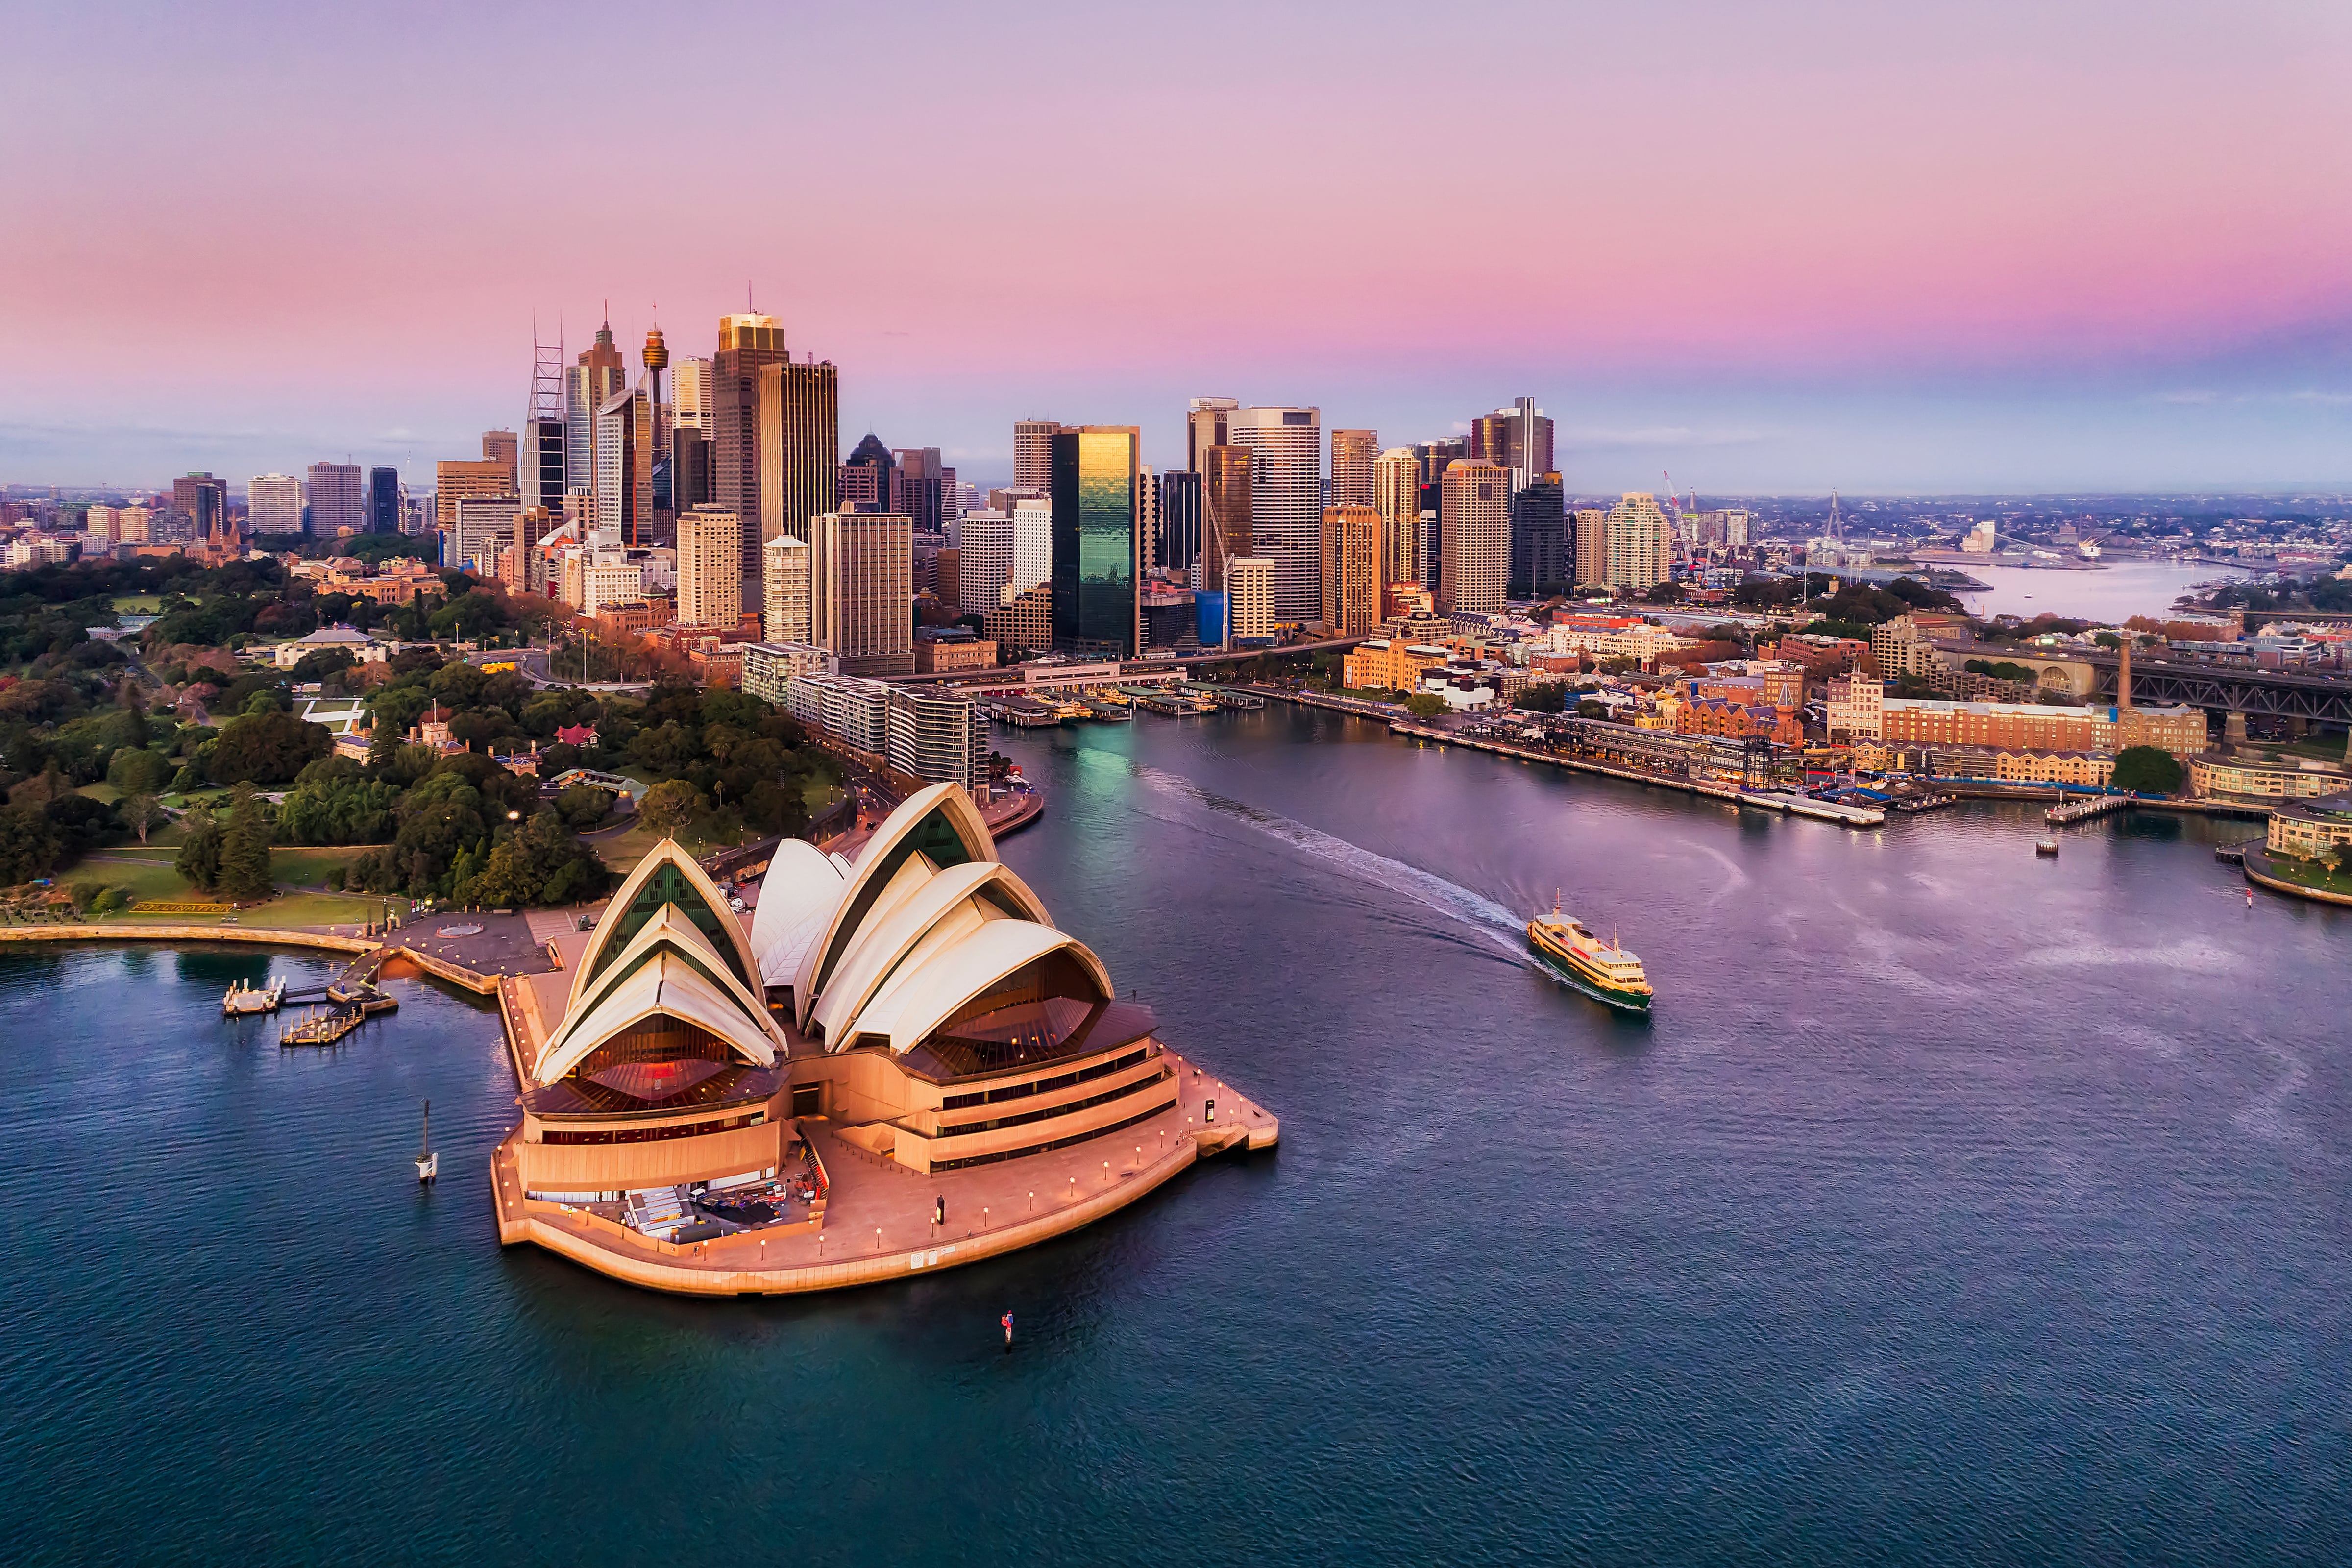 “I recommend a luxury cruise across the harbour – you can sip on Champagne as you admire the iconic skyline”